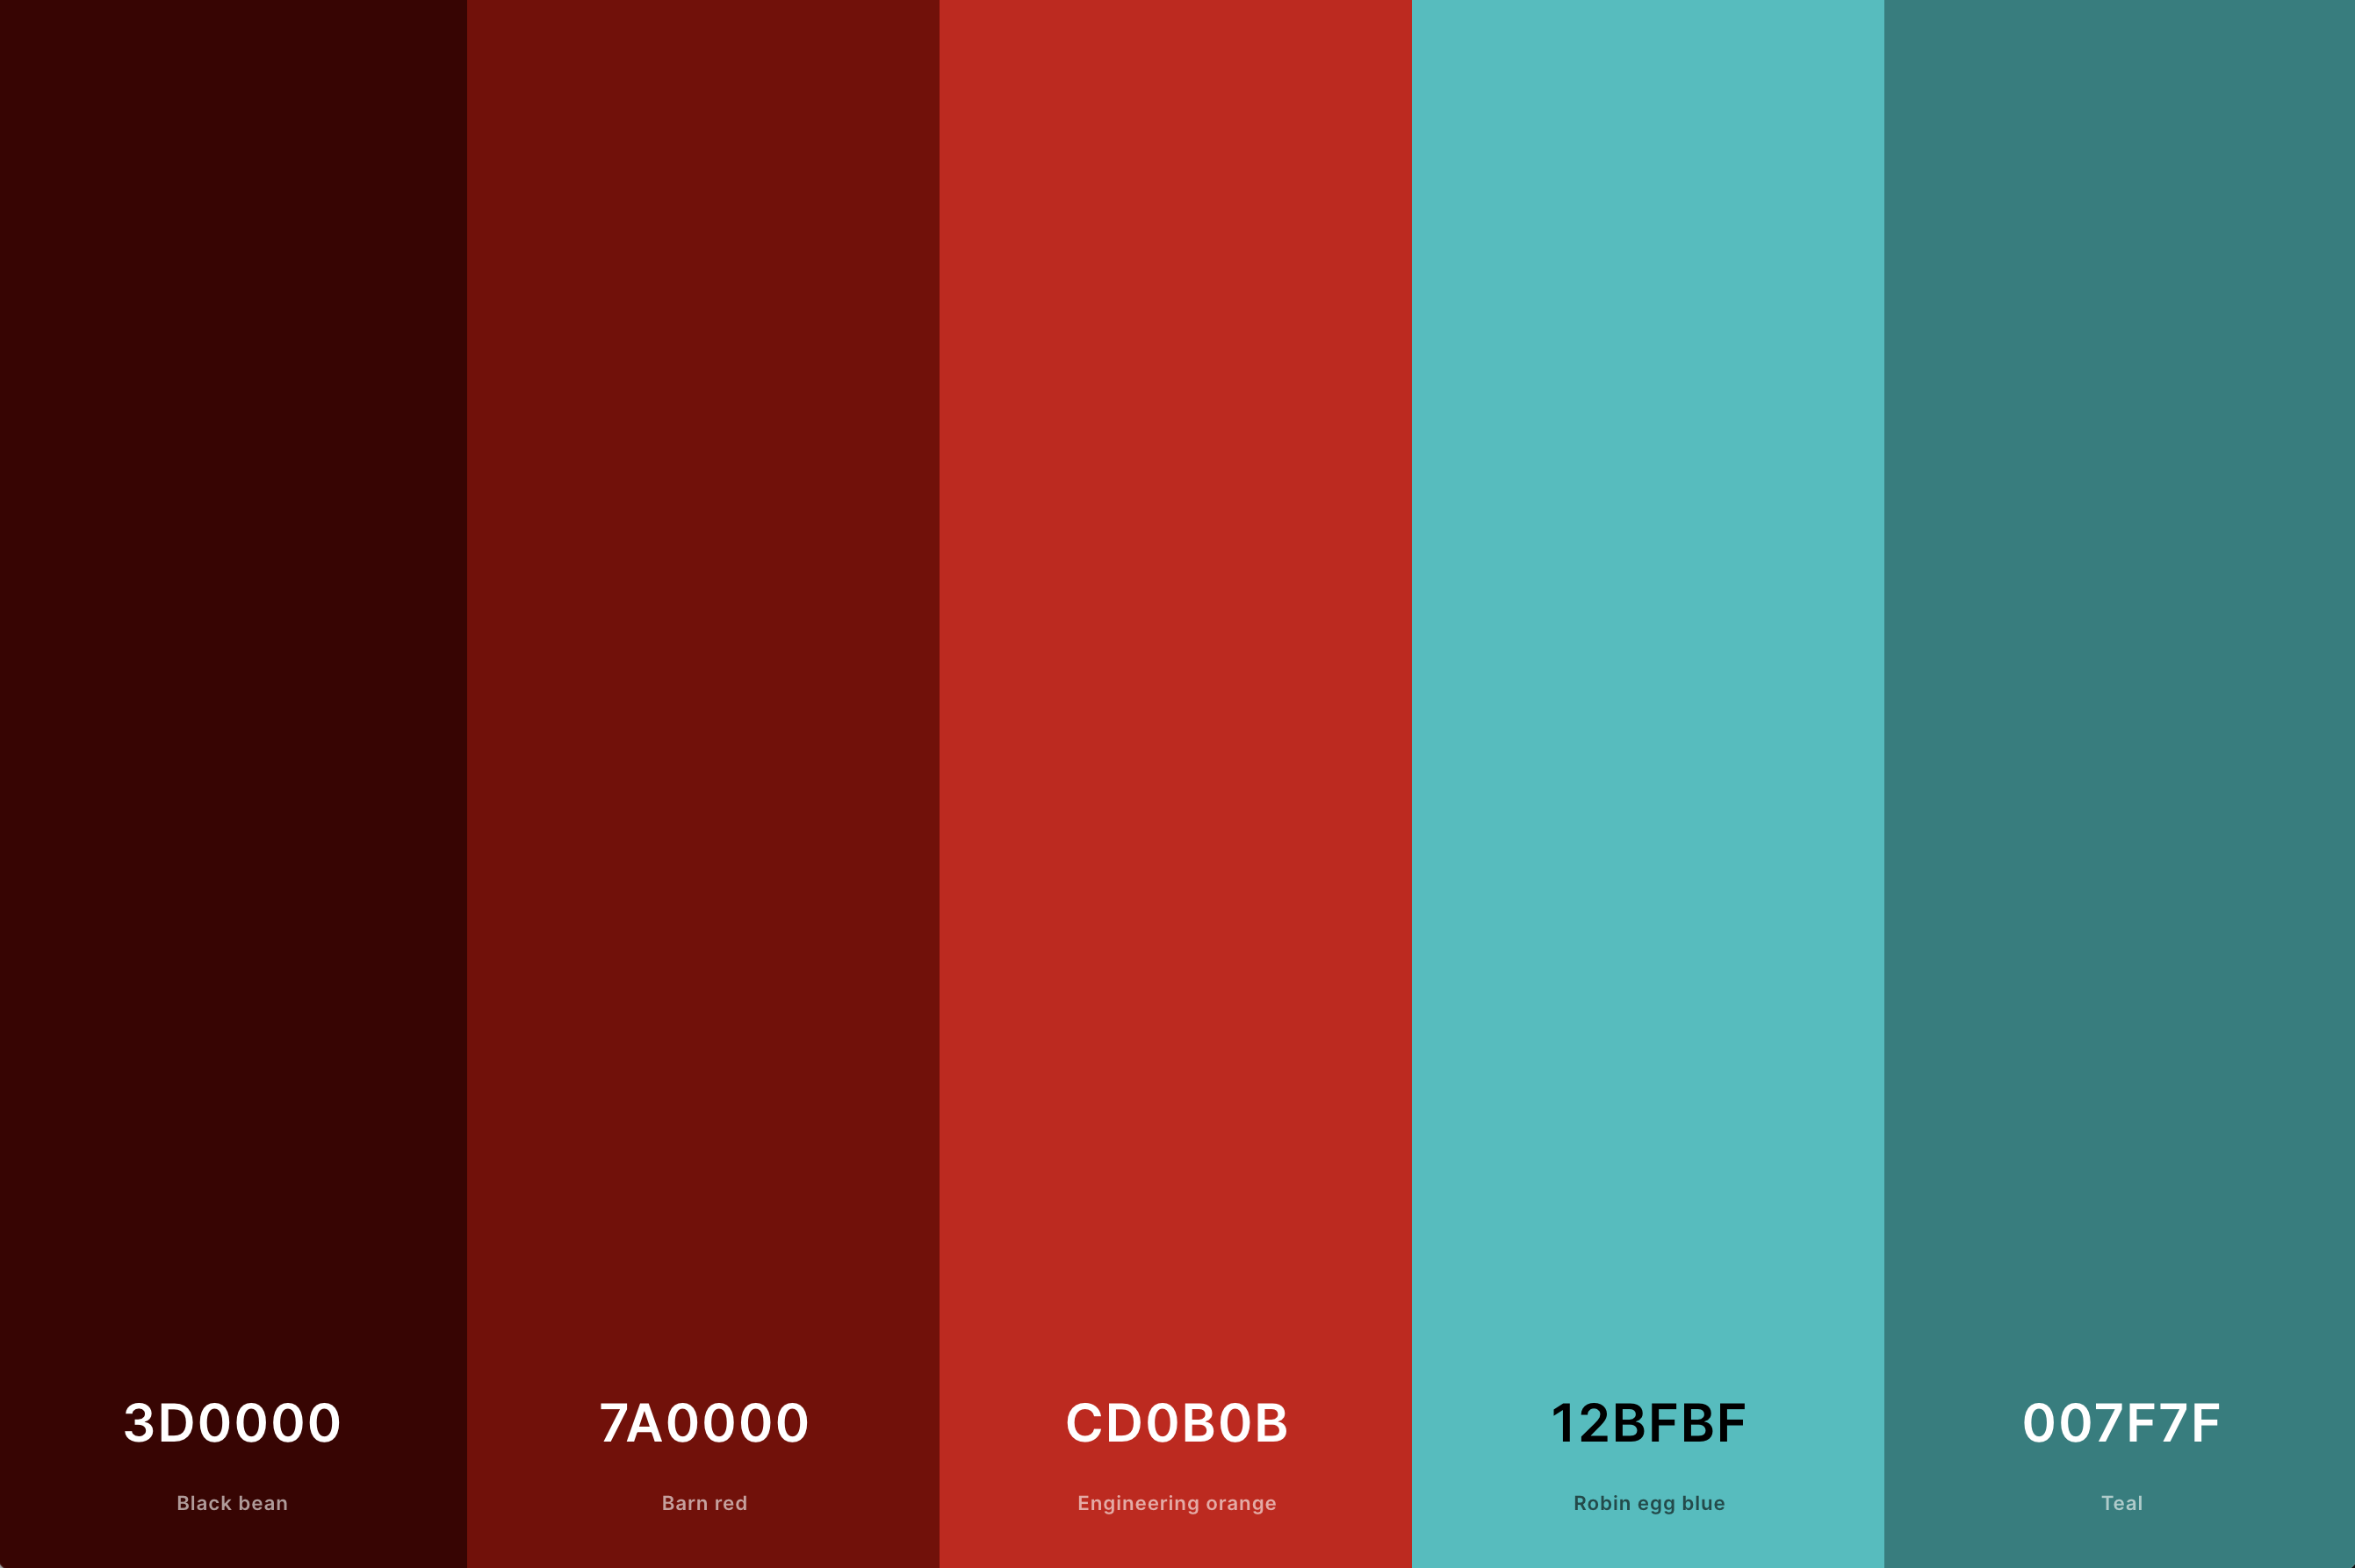 25. Red And Teal Color Palette Color Palette with Black Bean (Hex #3D0000) + Barn Red (Hex #7A0000) + Engineering Orange (Hex #CD0B0B) + Robin Egg Blue (Hex #12BFBF) + Teal (Hex #007F7F) Color Palette with Hex Codes